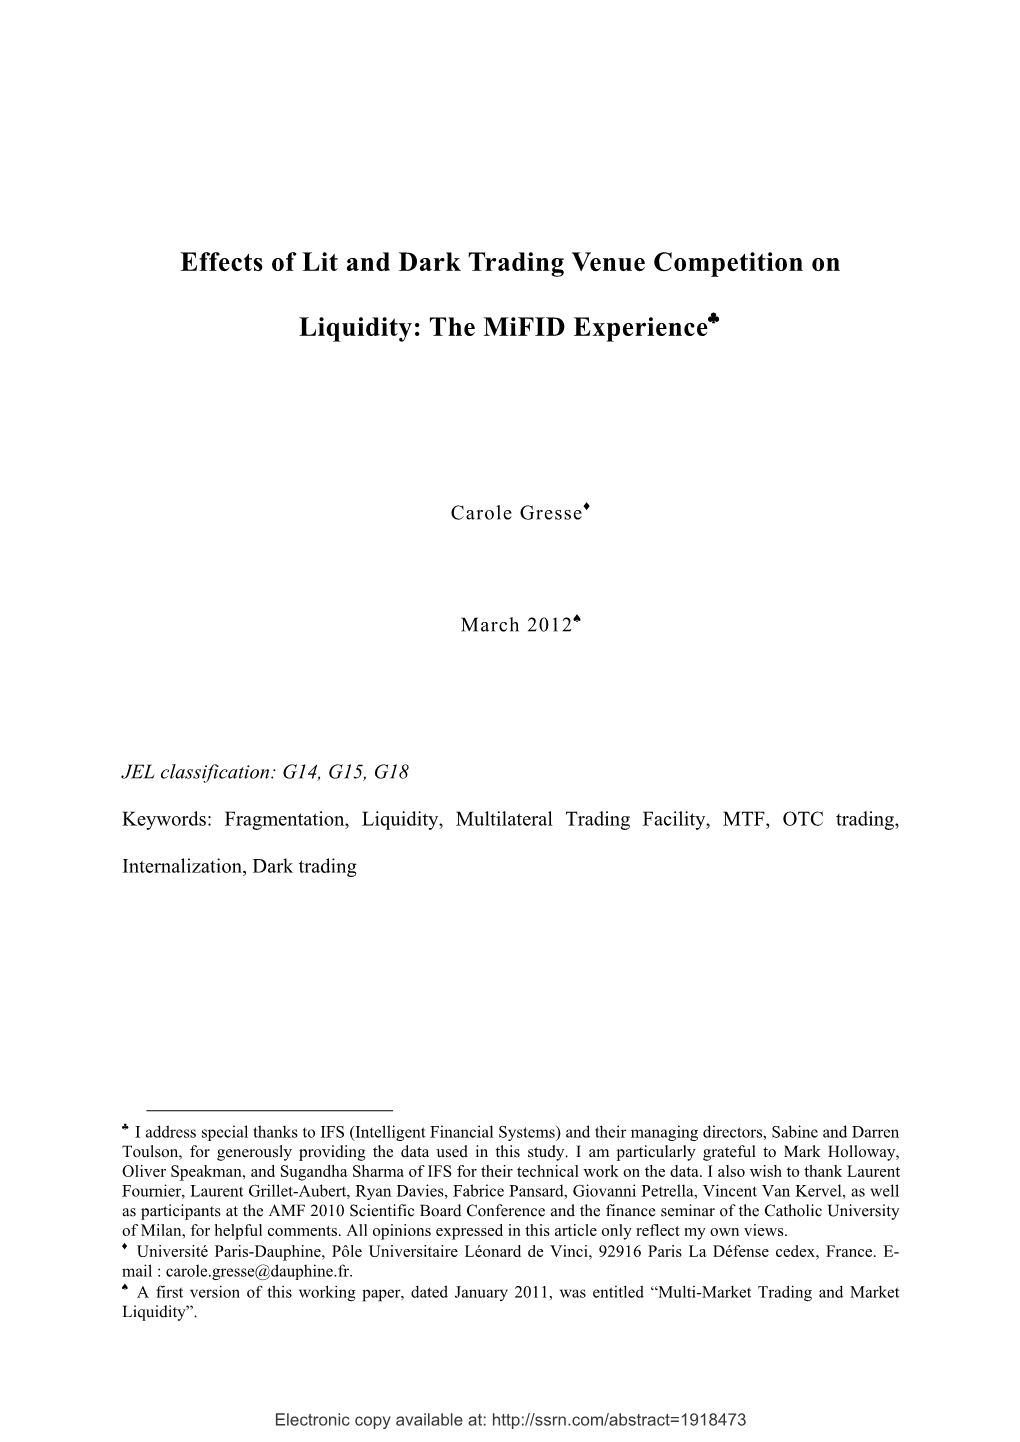 Effects of Lit and Dark Trading Venue Competition on Liquidity: the Mifid Experience